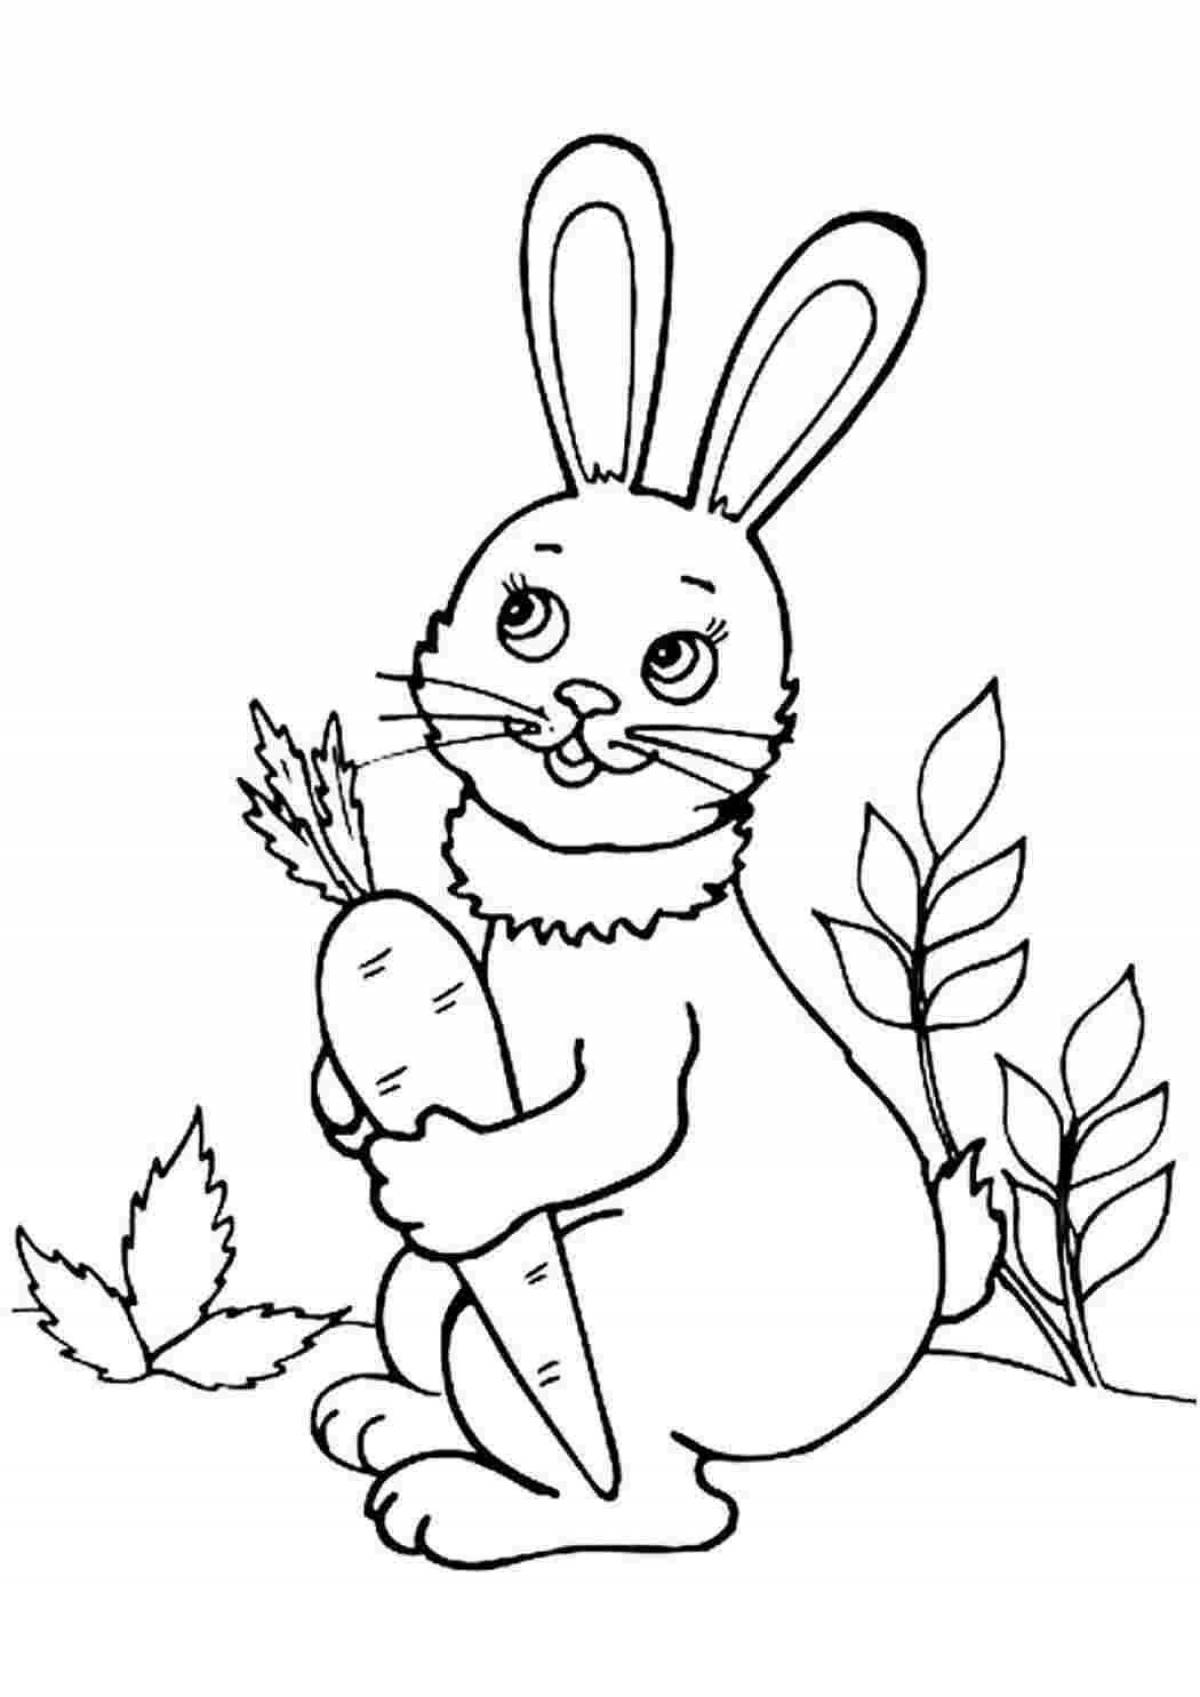 Coloring round-nosed rabbit